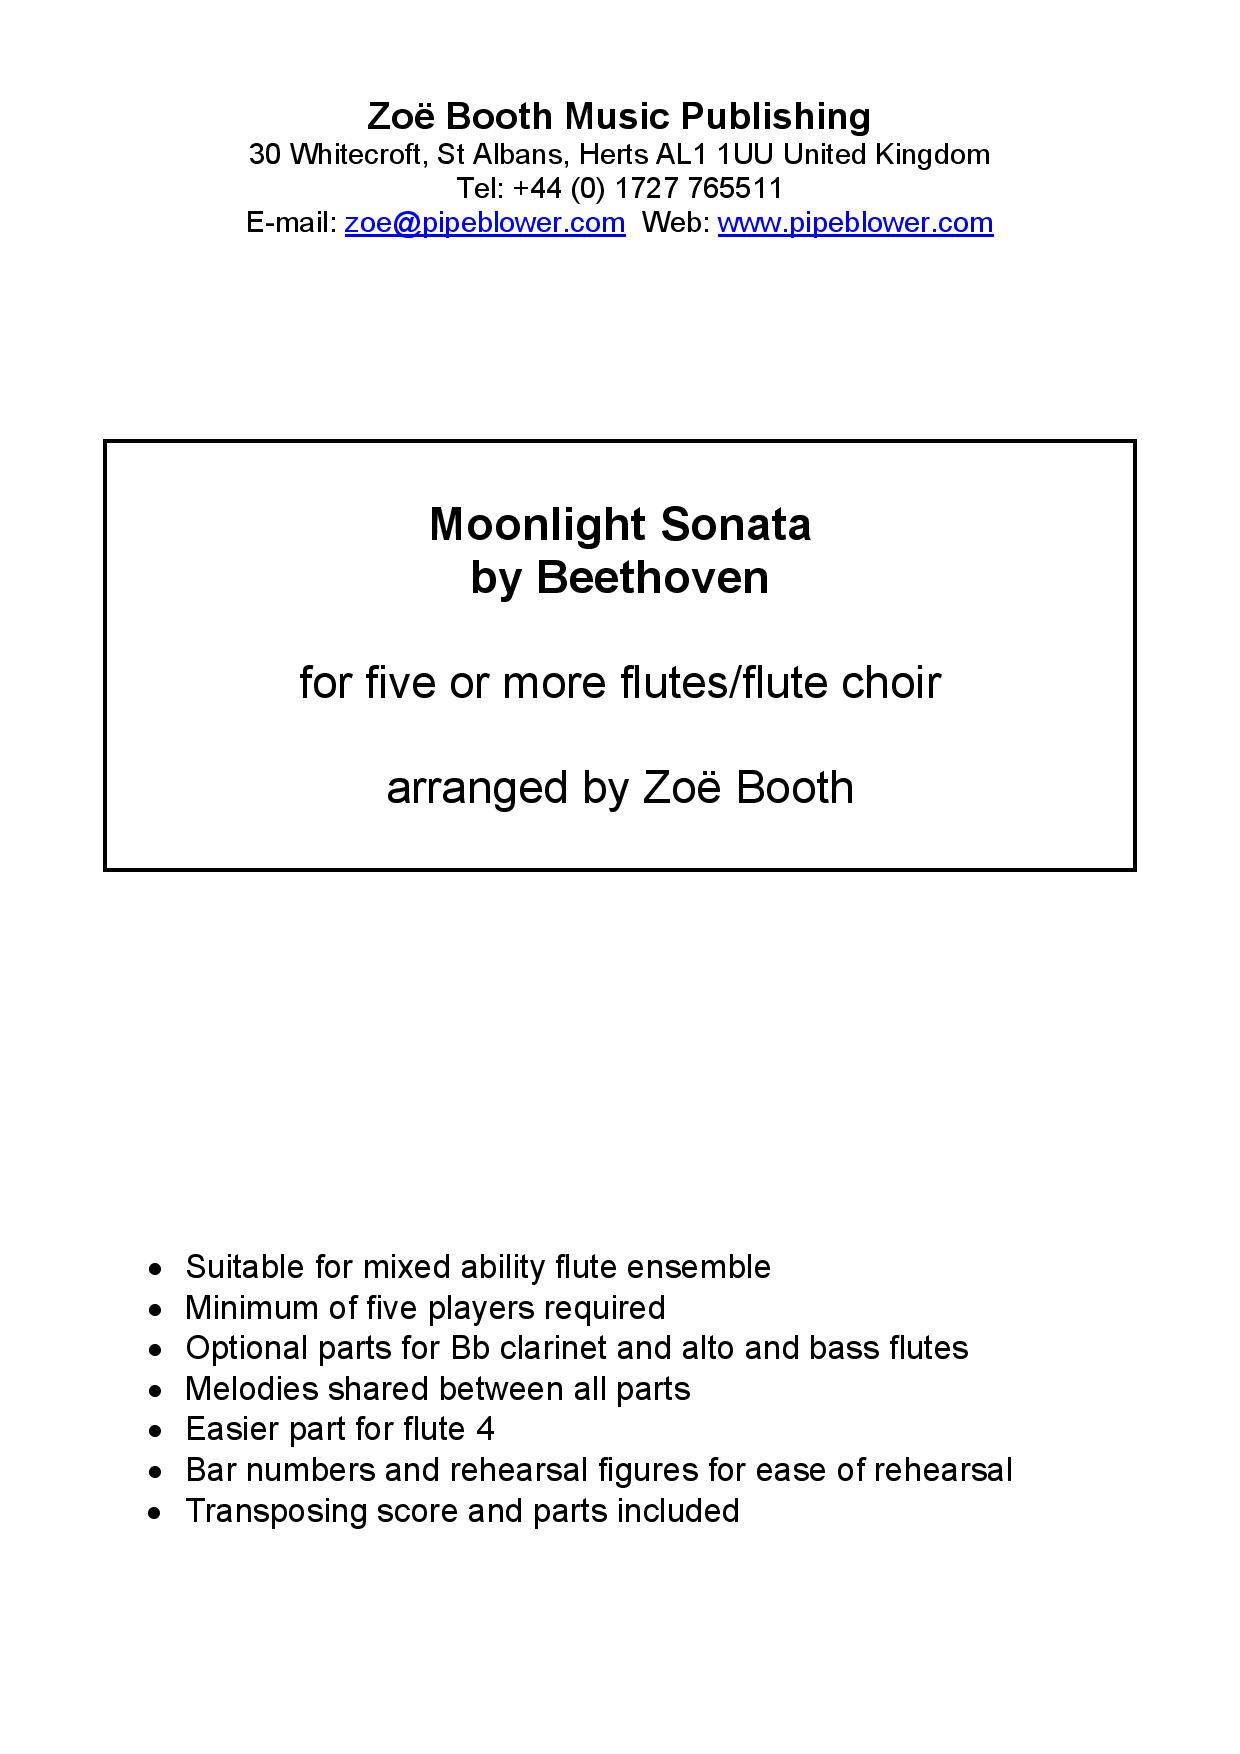 Moonlight Sonata by Beethoven,  arranged by Zoë Booth for five or more flutes/flute choir